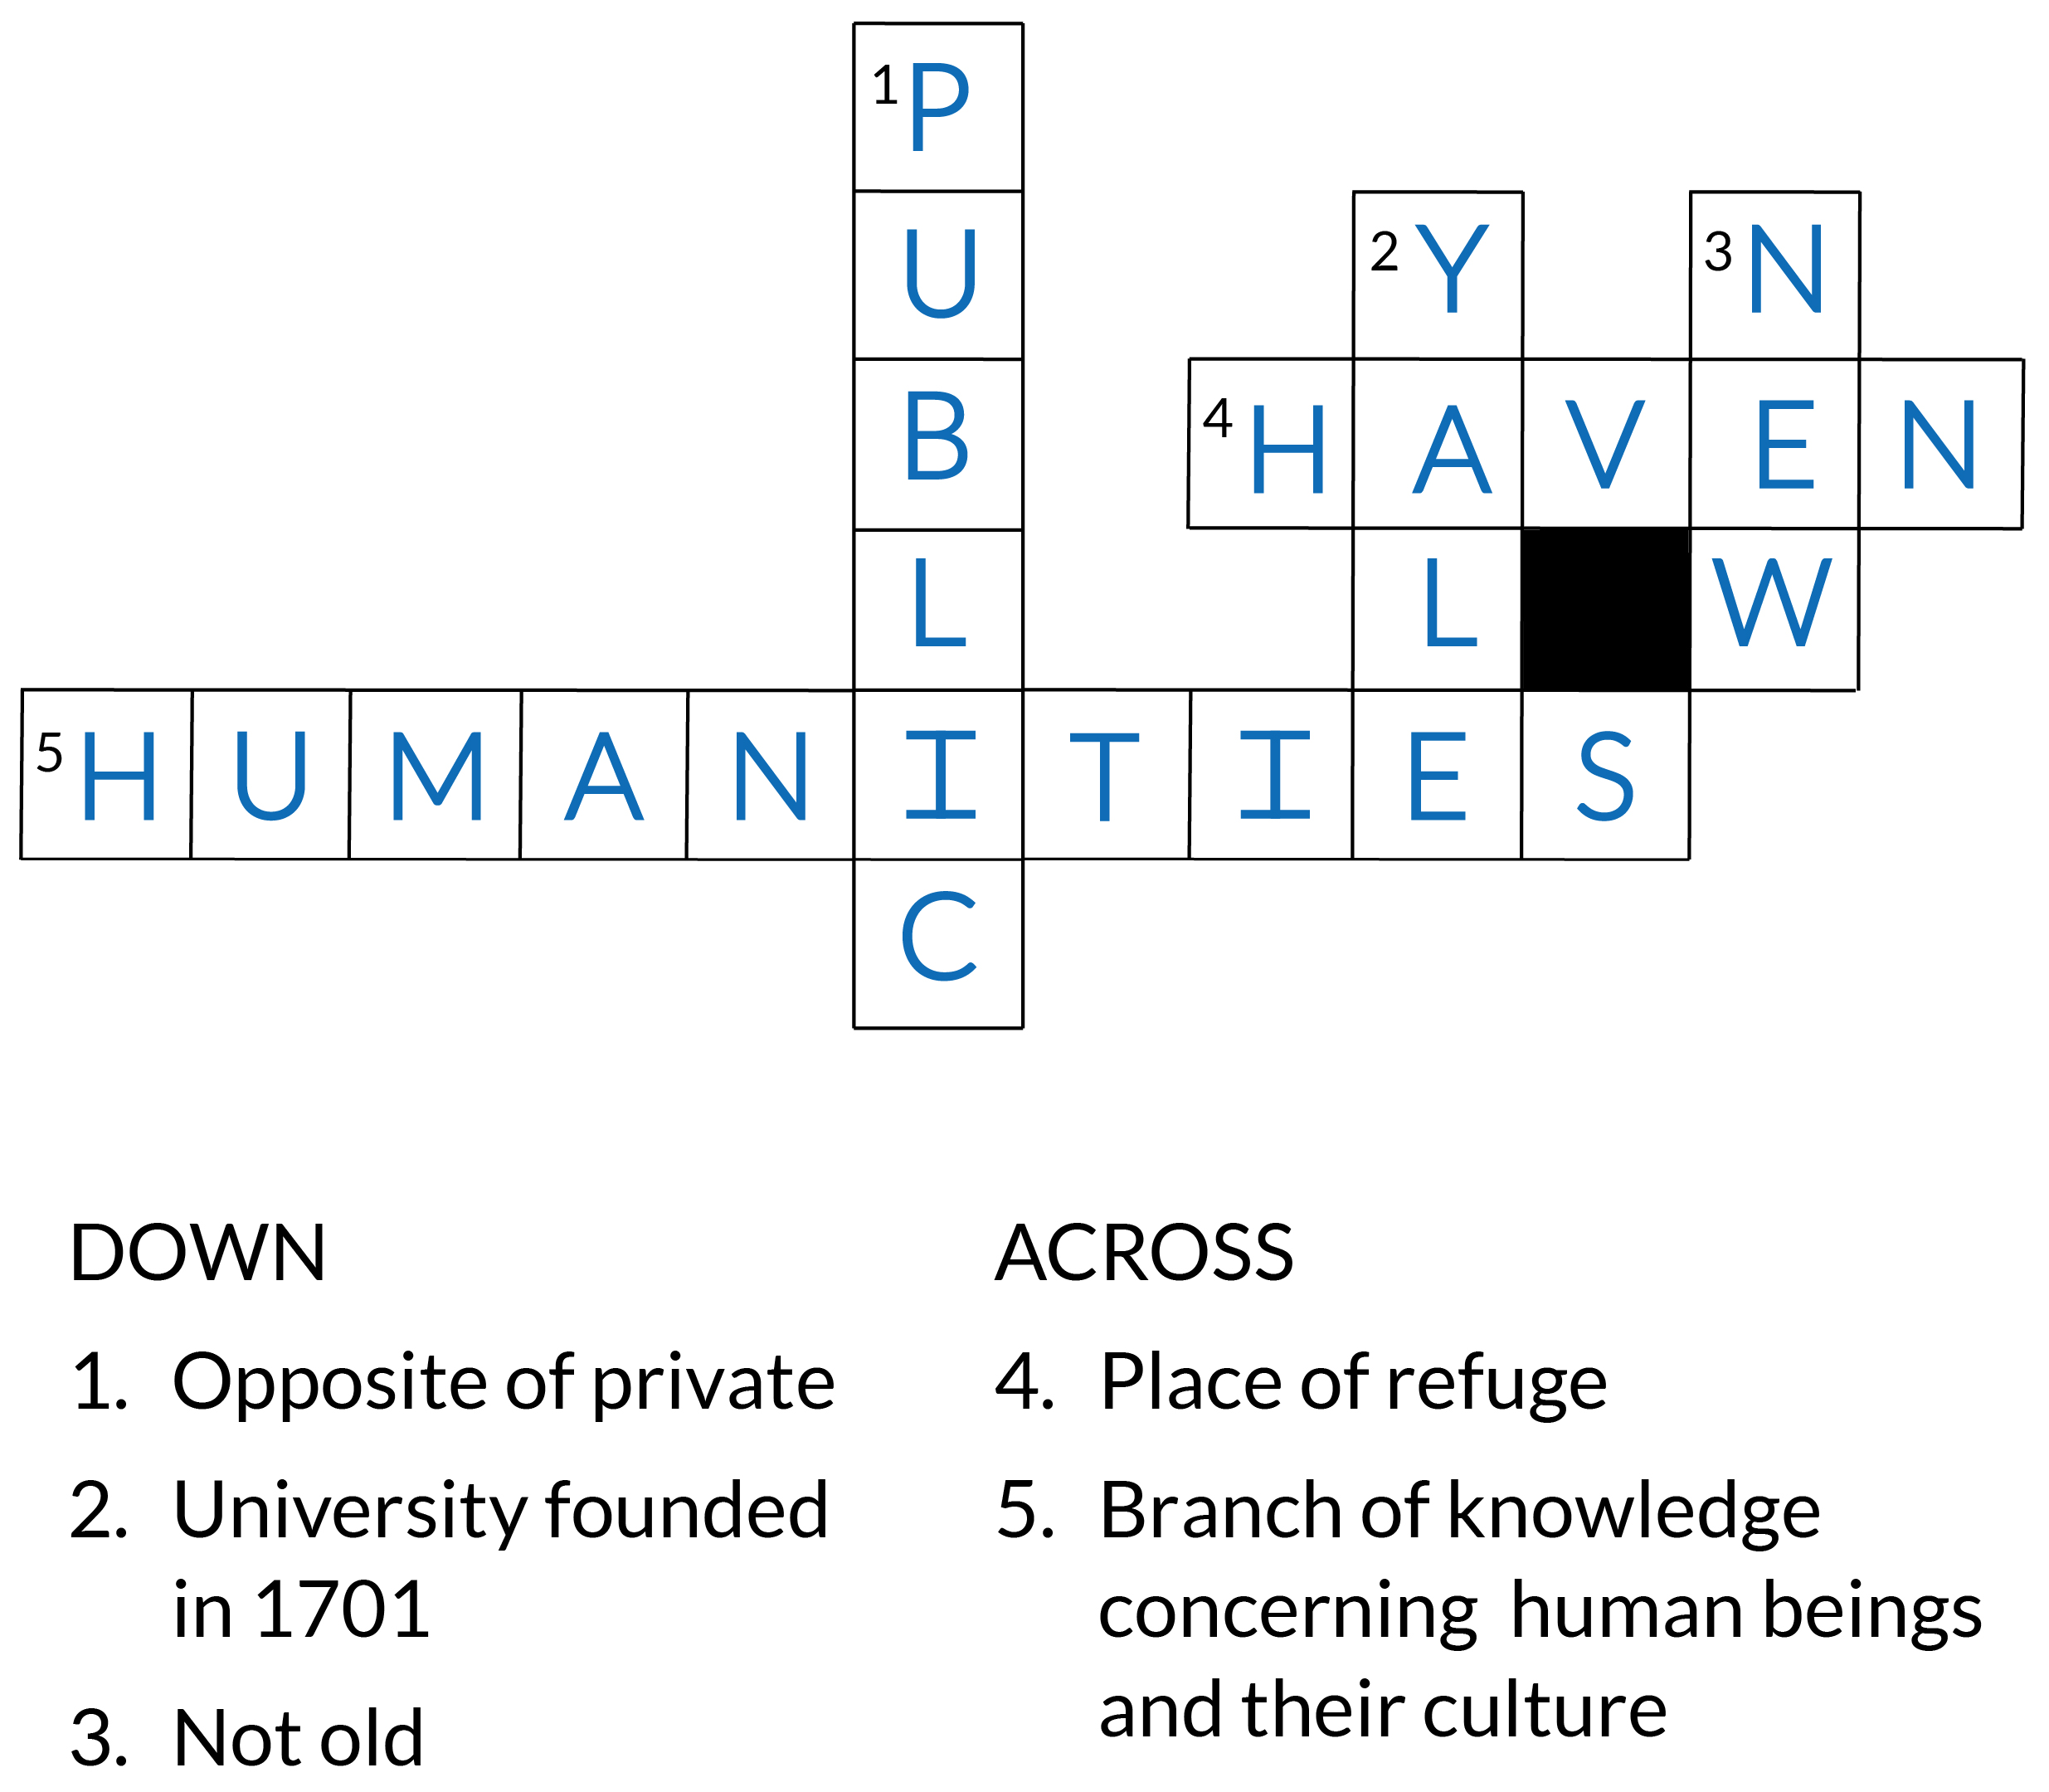 This month's puzzler